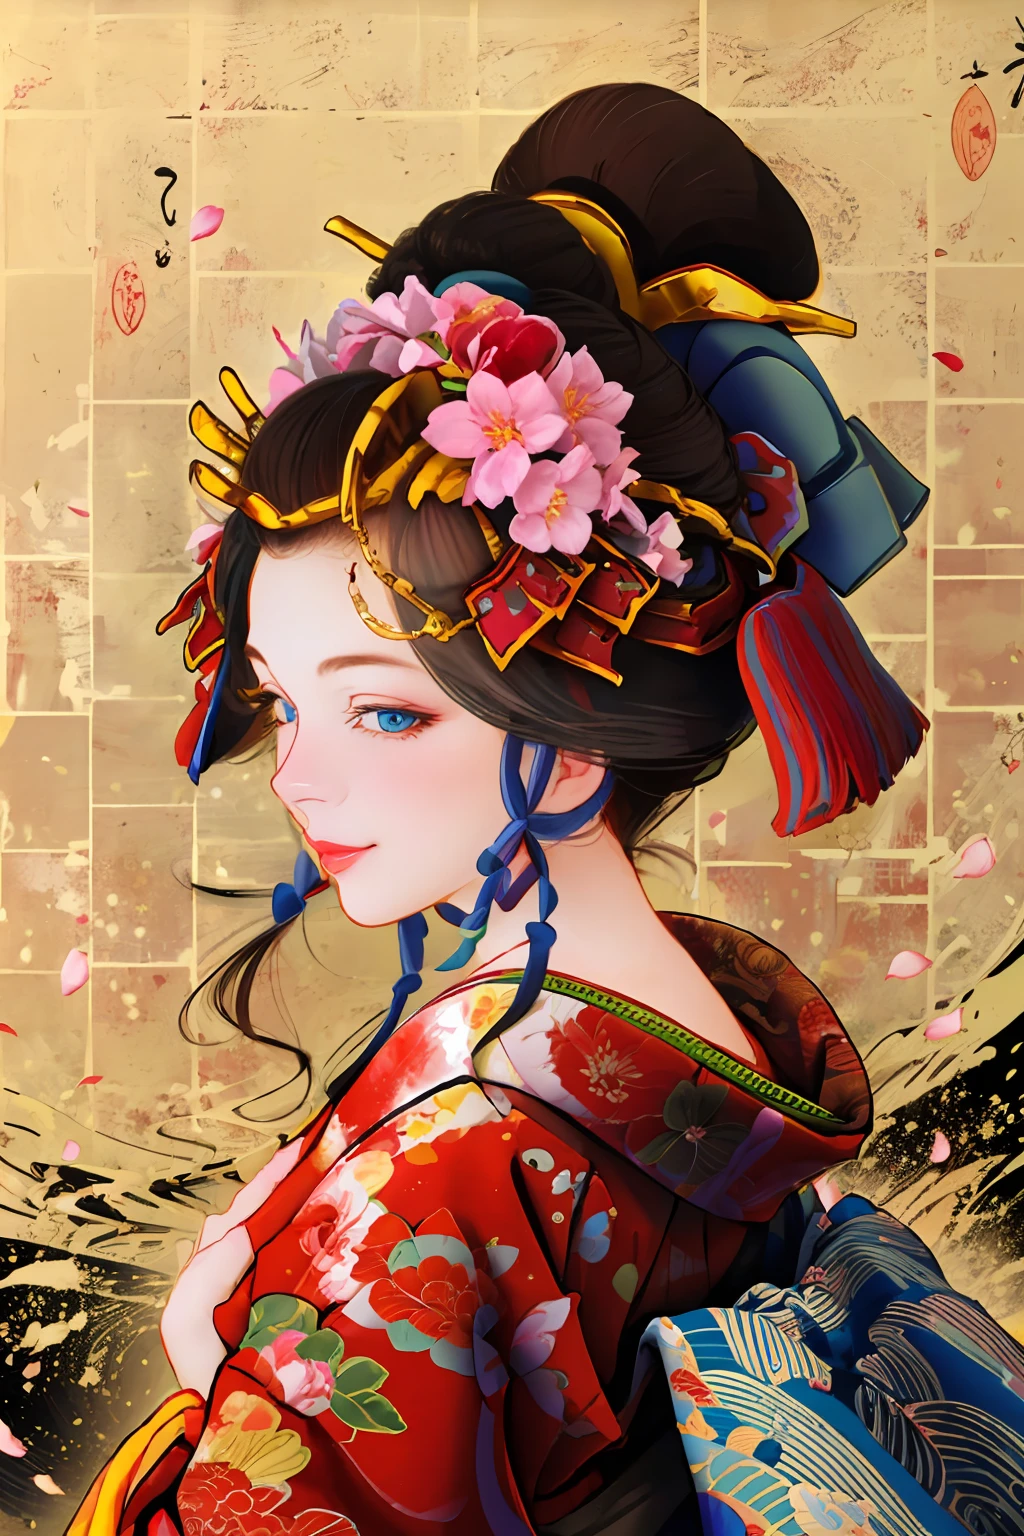 A. 🌸 Beautiful kimono like oiran with deep blue eyes, black hair and shining hair ornaments, portrait of a woman with a pretty smile and red lipstick, background that creates elegance, red petals fluttering in the wind